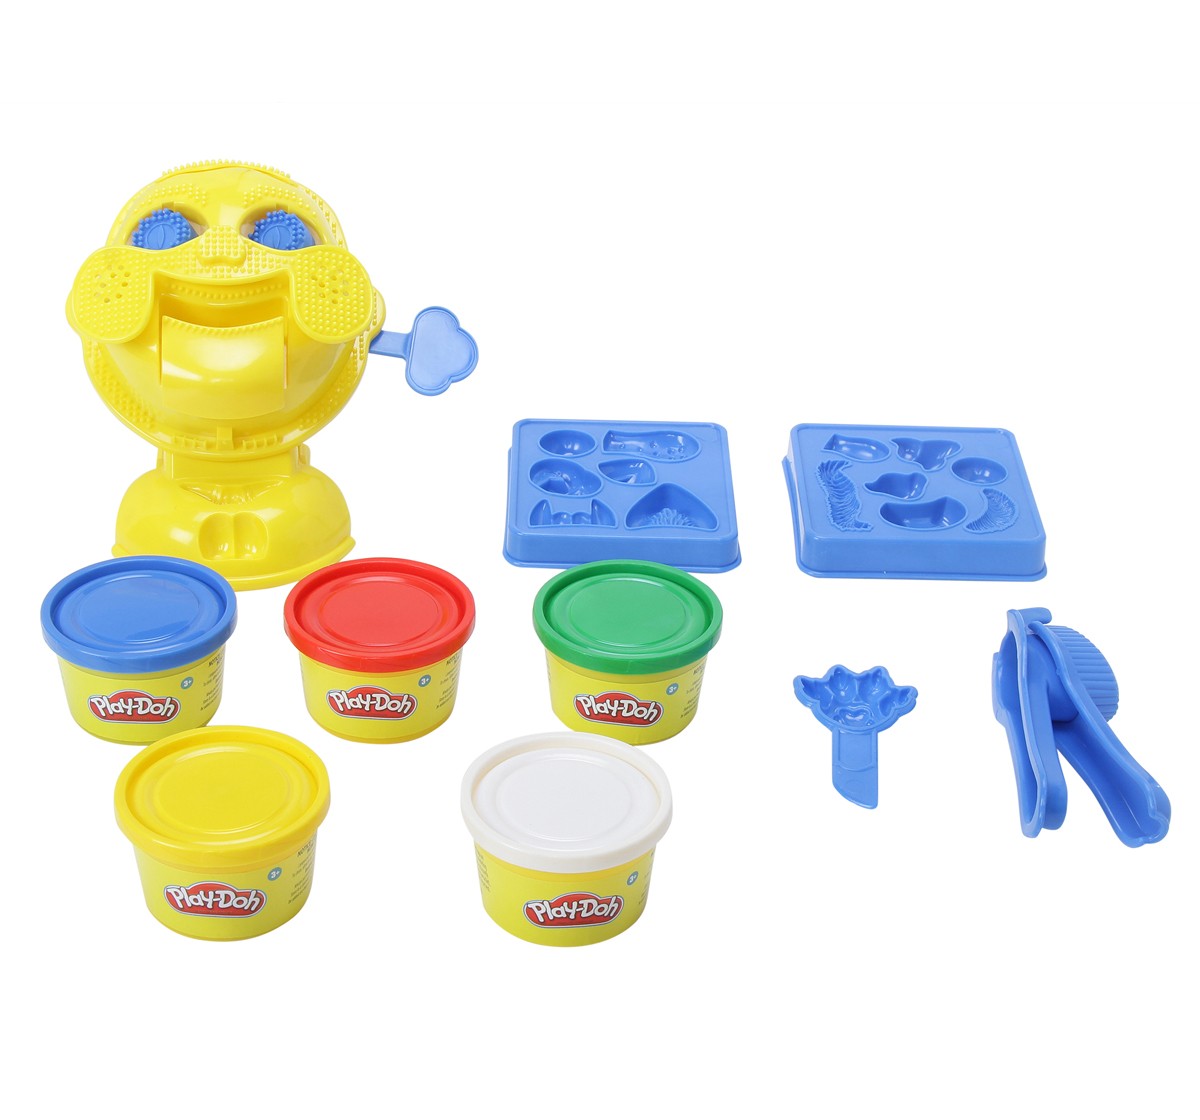 Play Doh Play Faces Activity Toy for Kids 3Y+, Multicolour